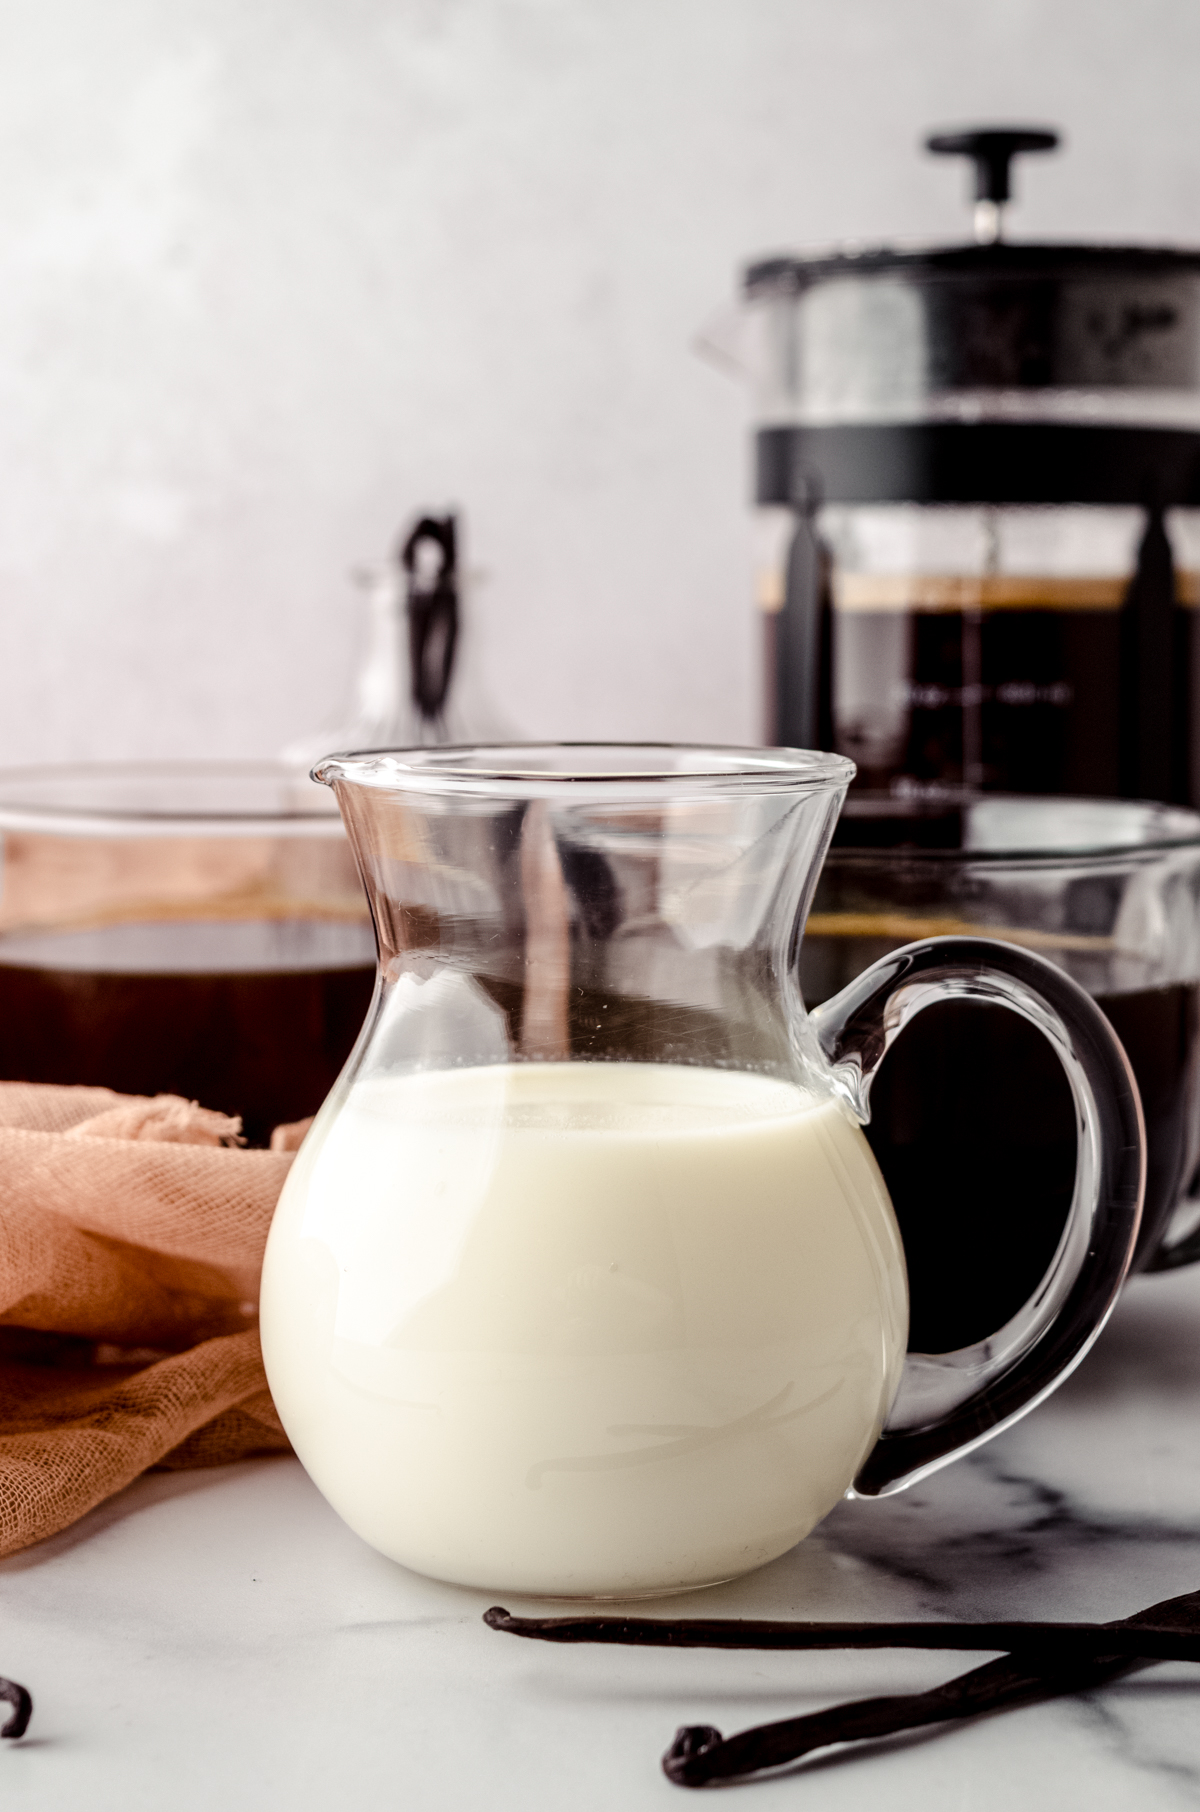 A glass pitcher with homemade French vanilla creamer in it. There are mugs of coffee and a French press in the background.